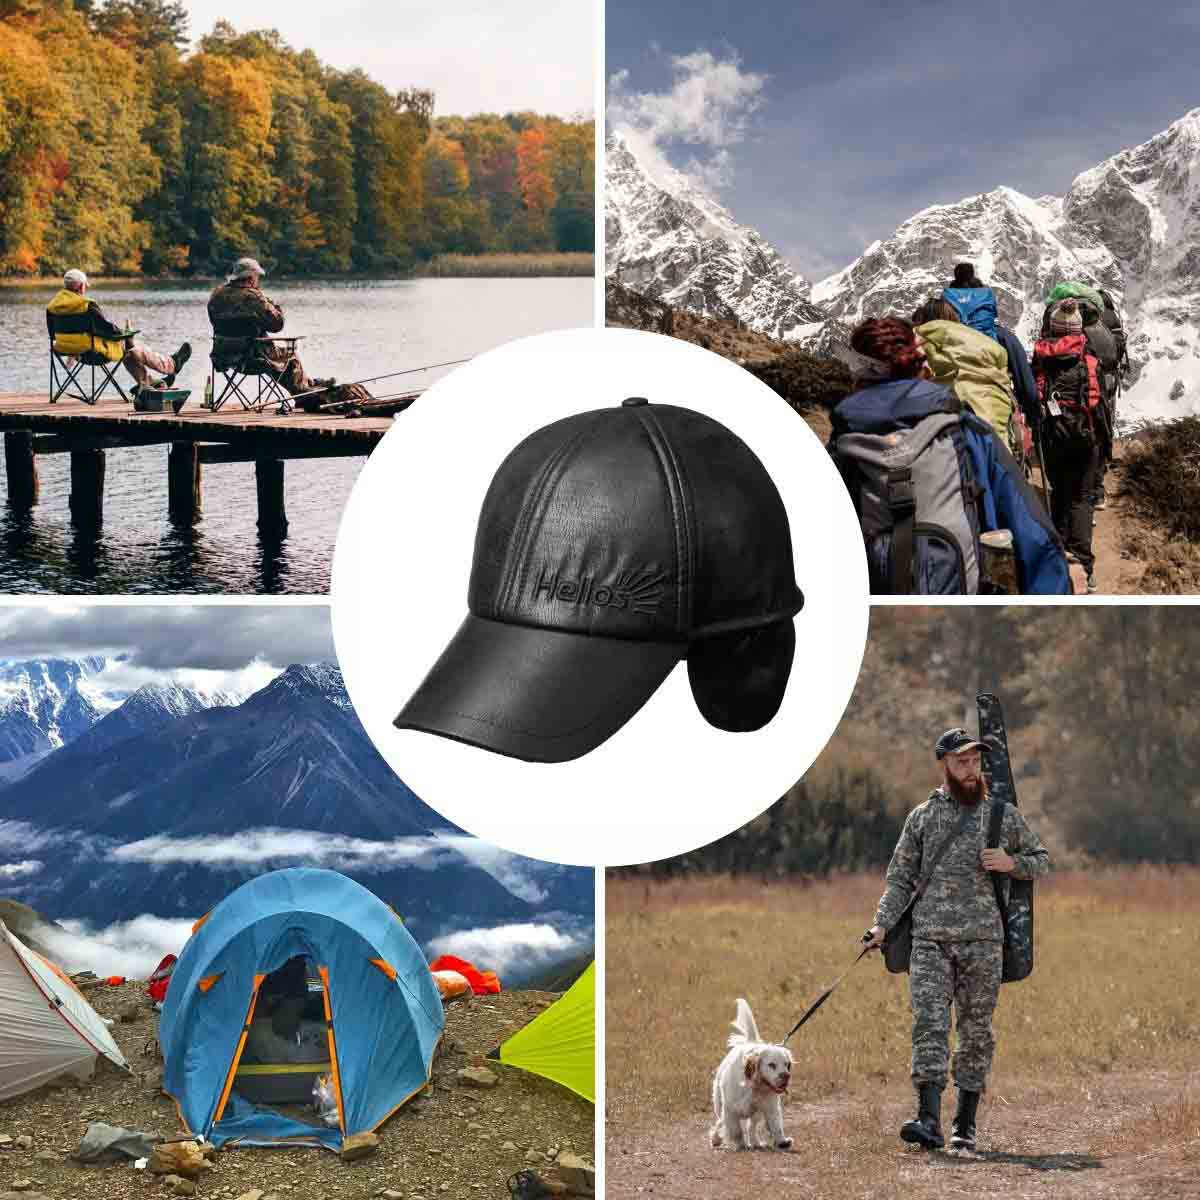 Ataka Winter Trapper Hat Ball Cap with Ear Flaps could be used in any kind of outdoor adventure